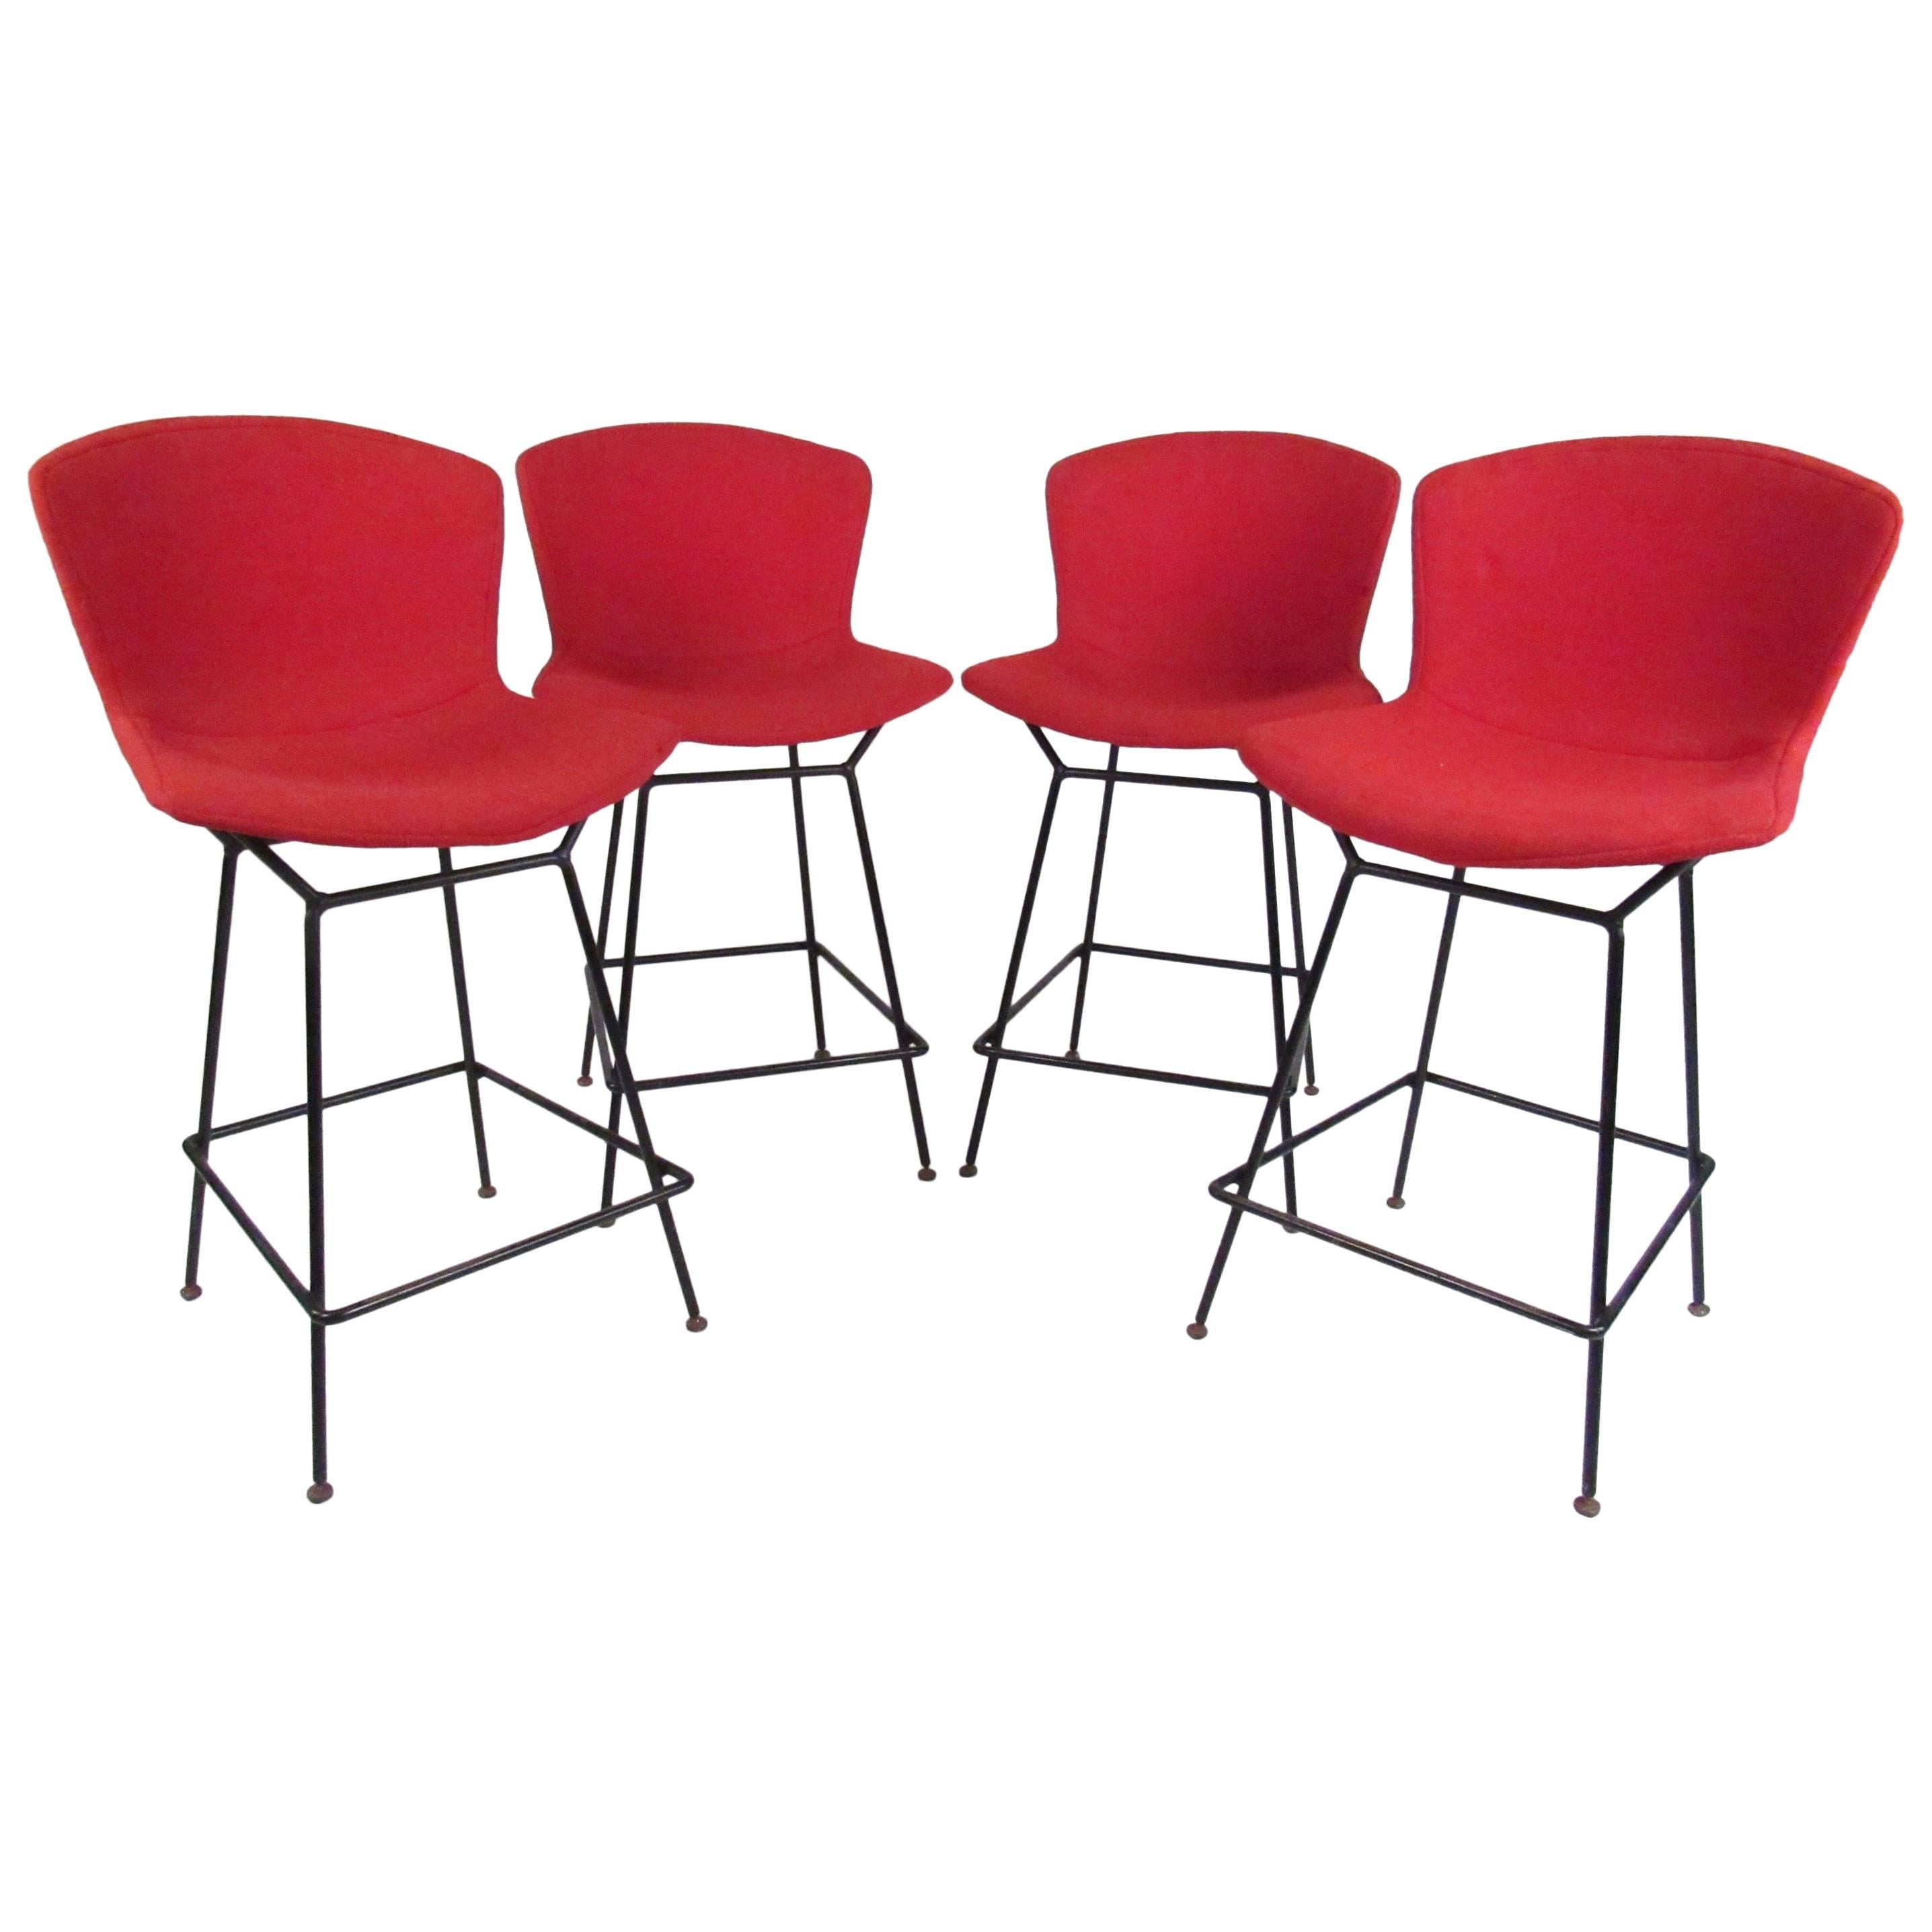 Set of Steel Wire Barstools by Harry Bertoia for Knoll Associates